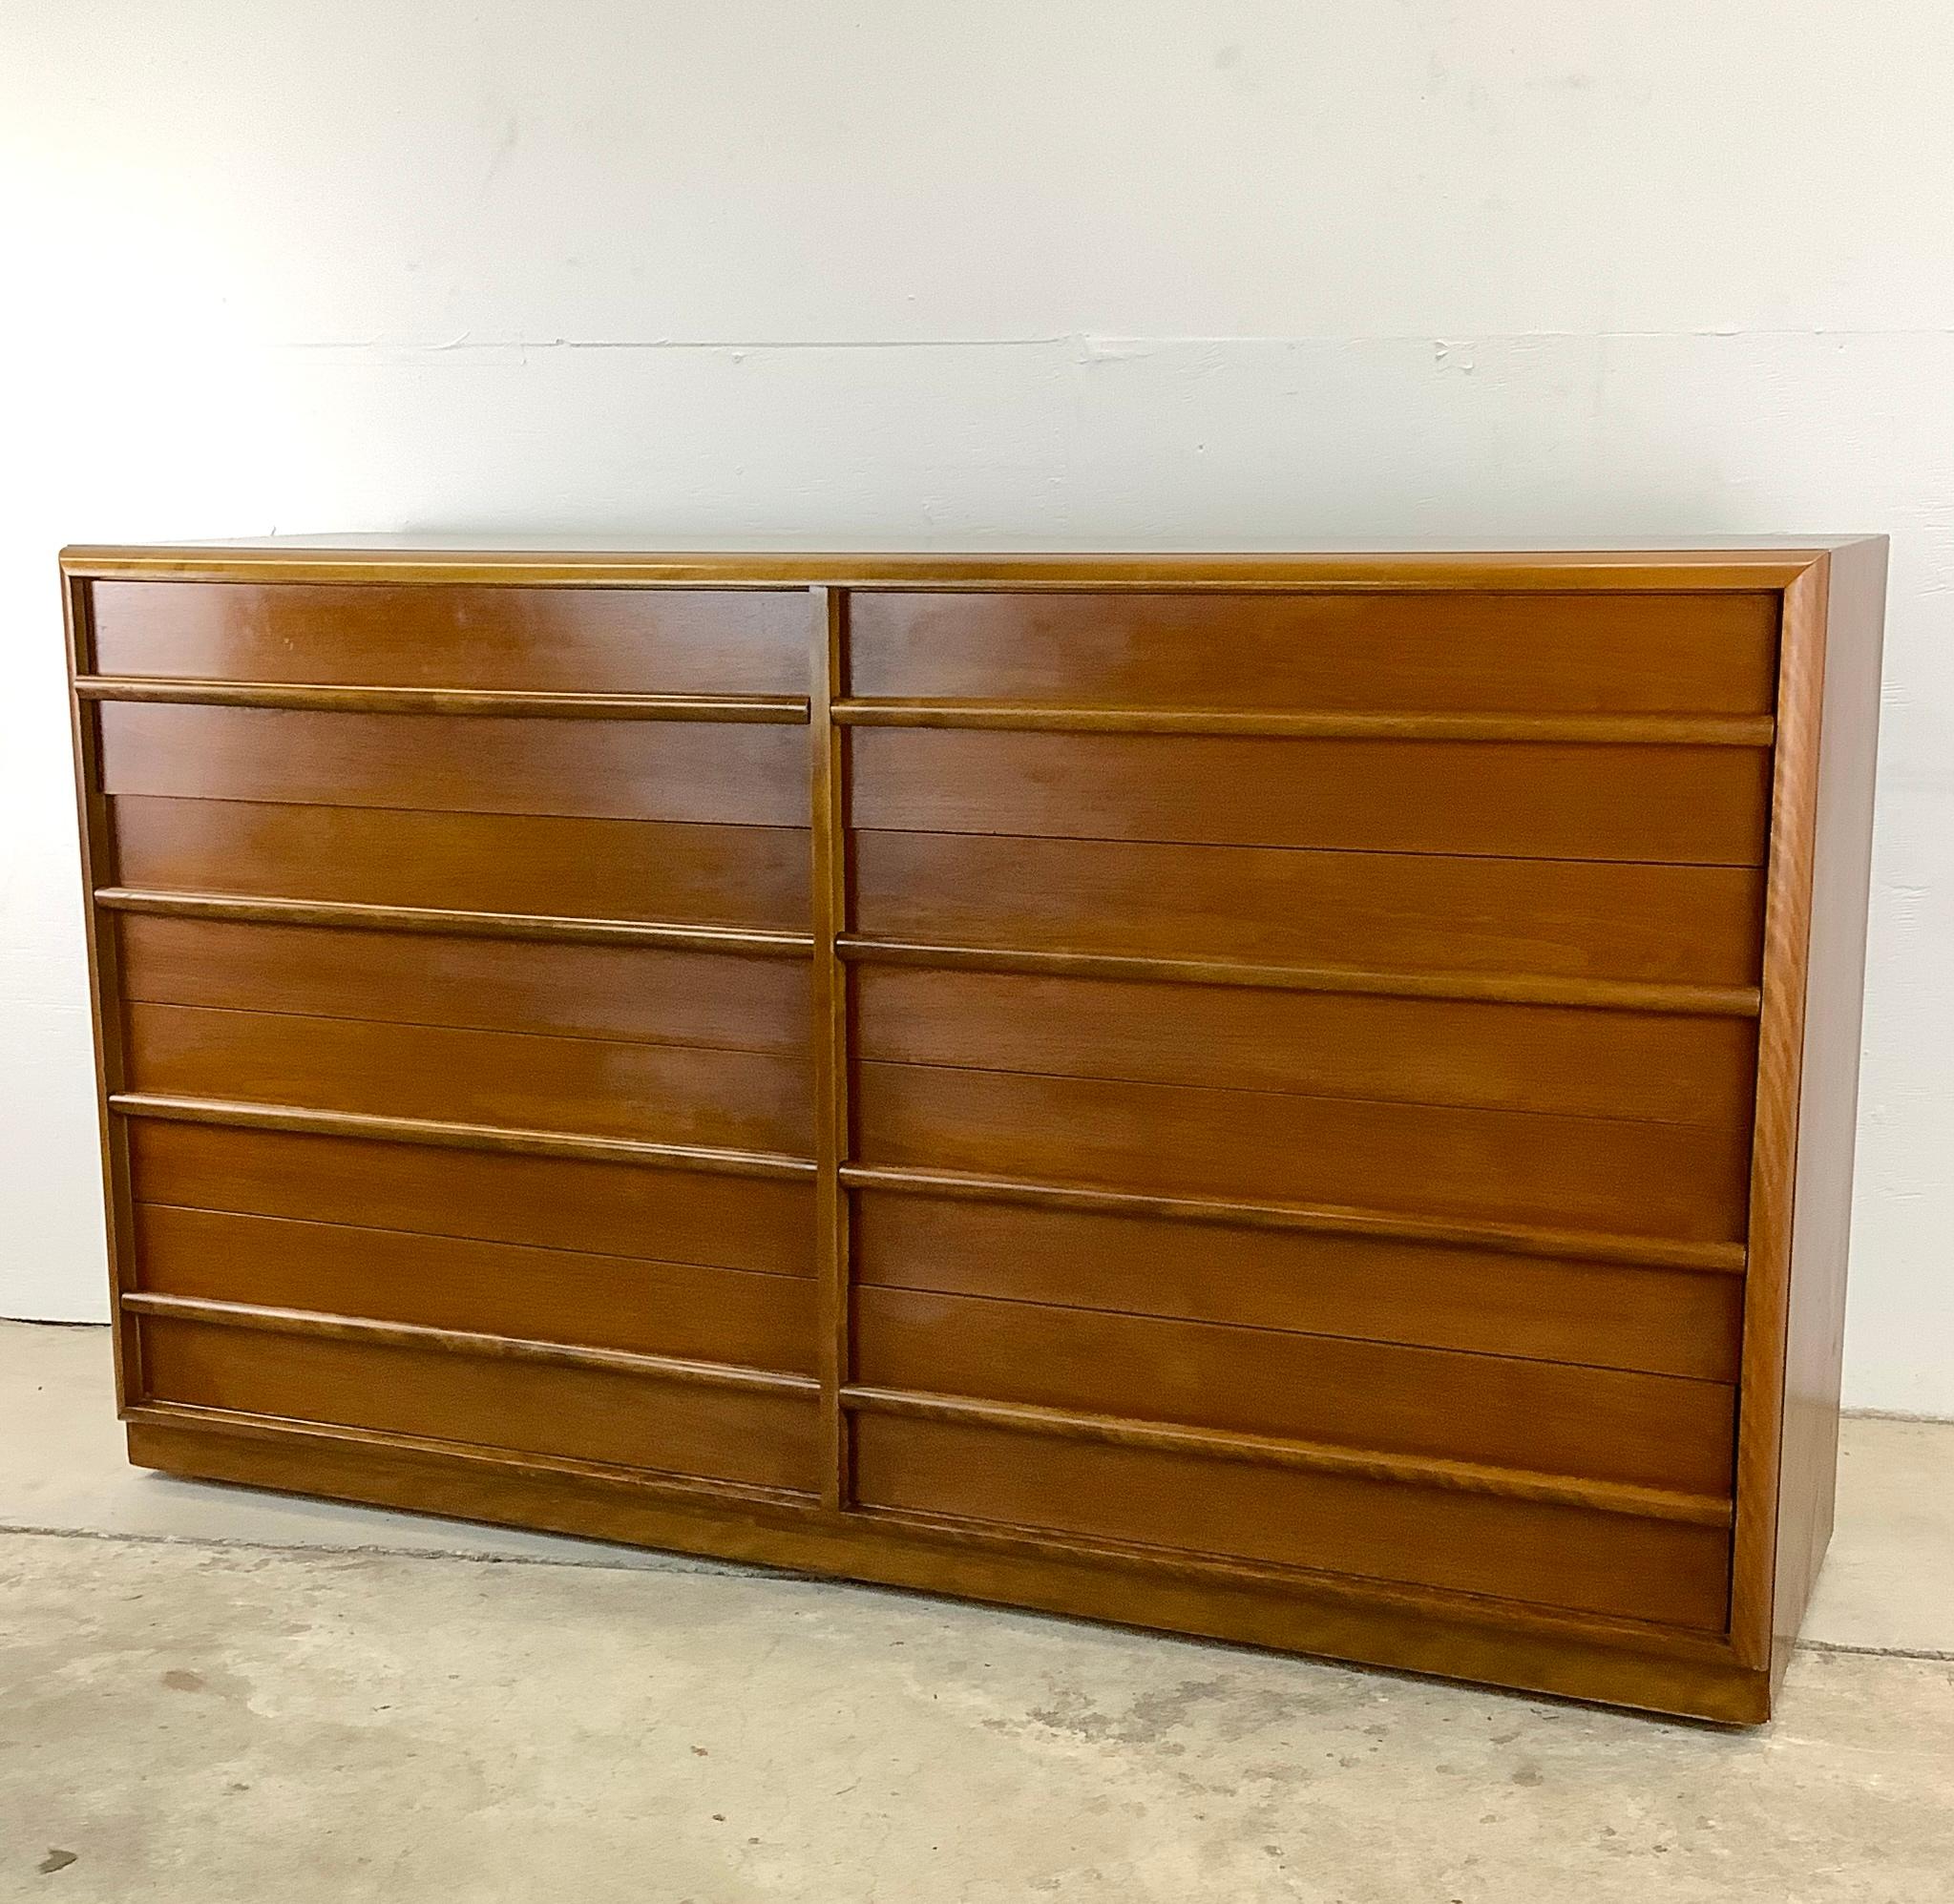 This exquisite eight-drawer double dresser, designed by the esteemed T.H. Robsjohn-Gibbings for Widdicomb, embodies the essence of mid-century elegance. The dresser's spacious interior offers ample storage space for an organized and clutter-free